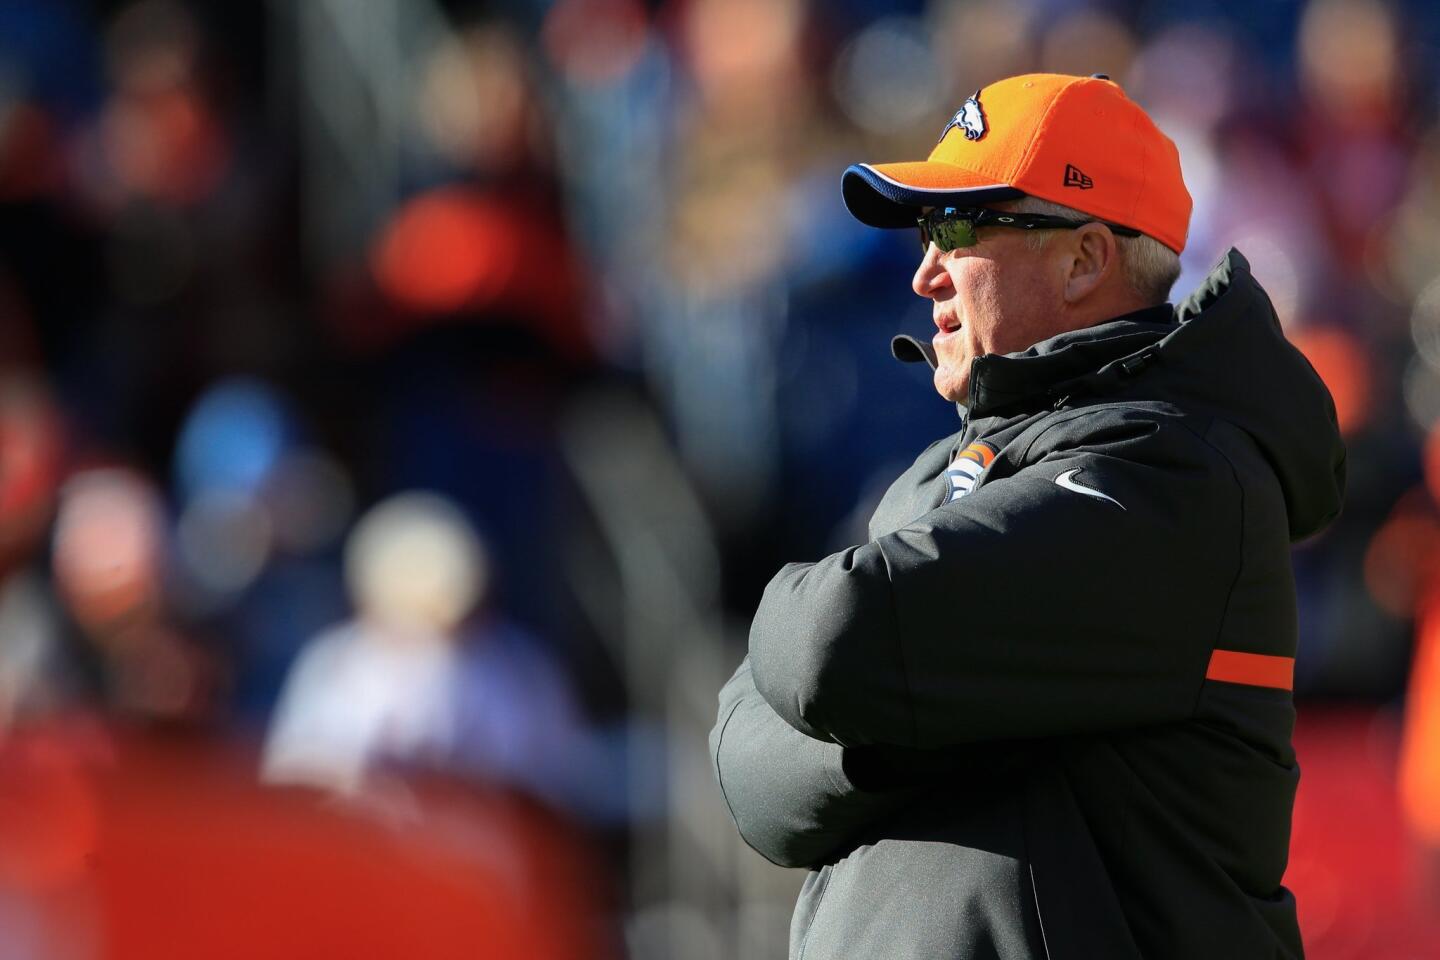 John Fox's recent availability sparks speculation given his pre-existing connections to Bears consultant Ernie Accorsi and general manager Ryan Pace. Fox was the Giants' defensive coordinator in 1998 when Accorsi took over as their GM. Their tenures overlapped until 2002, when Fox left to become the Panthers' coach.